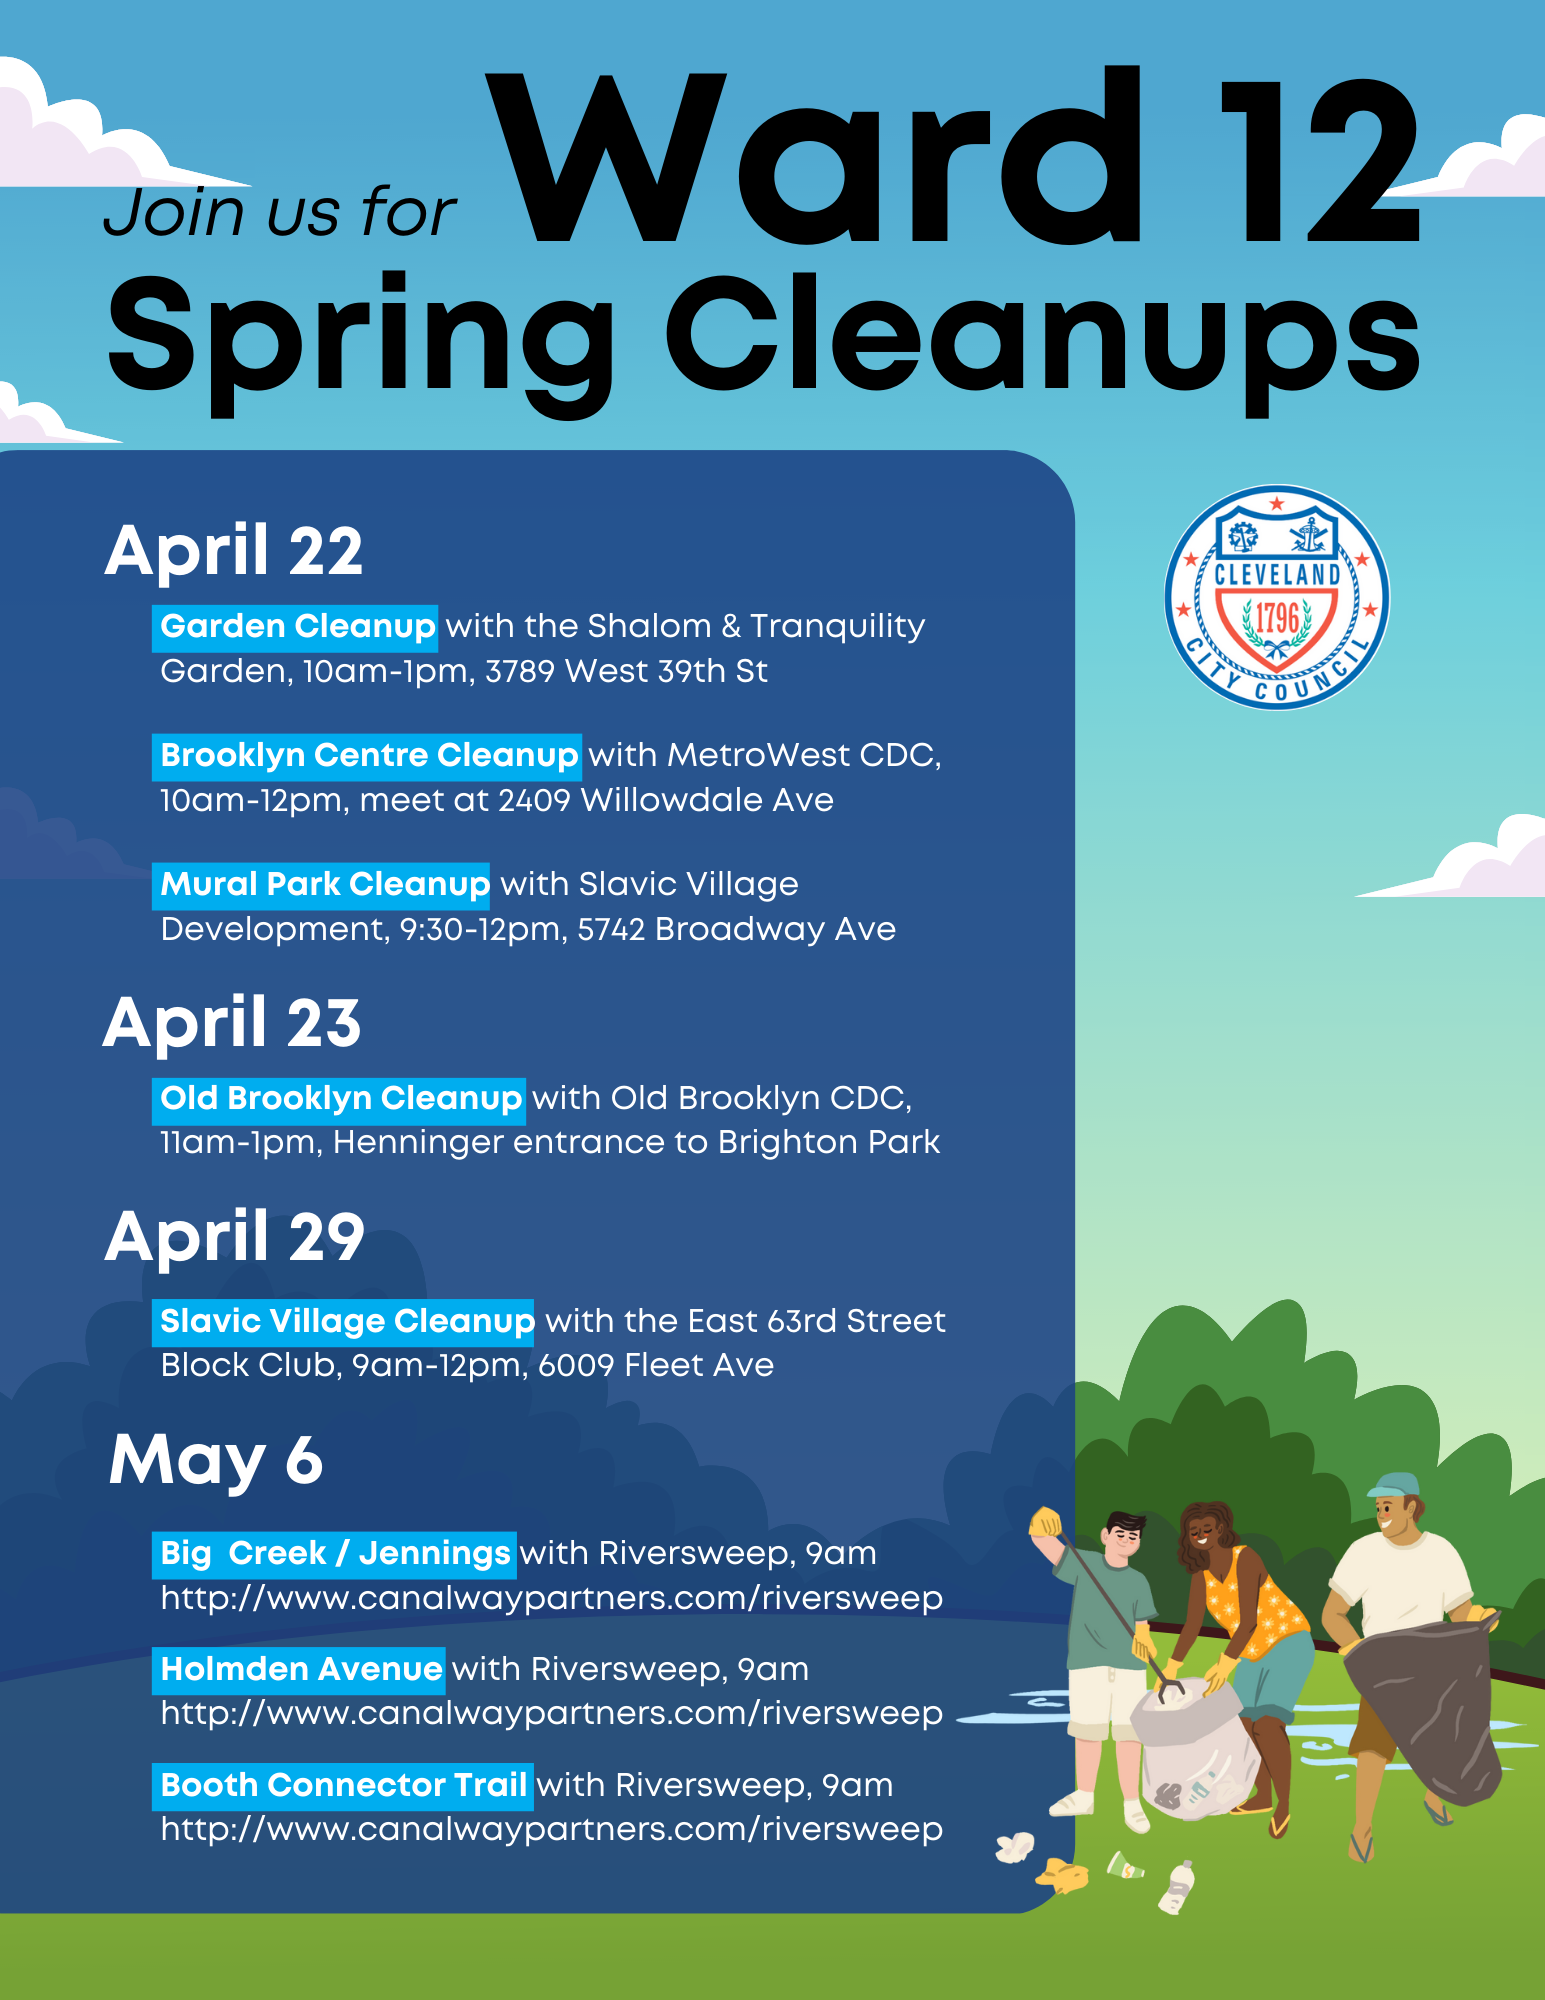 Schedule  Garden Cleanup @ Shalom & Tranquility Garden, 10am-1pm, 3789 West 39th St. ; Brooklyn Centre Cleanup with MetroWest CDC, 10am-12pm, 2409 Willowdale Ave ; Mural Park Cleanup with Slavic Village Development, 9:30-12pm, 5742 Broadway Ave ; Old Brooklyn Cleanup with Old Brooklyn CDC, 11am-1pm, Brighton Park at Henninger entrance;  Slavic Village Cleanup with the East 63rd Street Block Club, 9am-12pm, 6009 Fleet Ave ; Big Creek/Jennings, 9am, http://www.canalwaypartners.com/riversweep; Holmden Ave, 9am, http://www.canalwaypartners.com/riversweep; Booth Connector Trail, 9am, http://www.canalwaypartners.com/riversweep